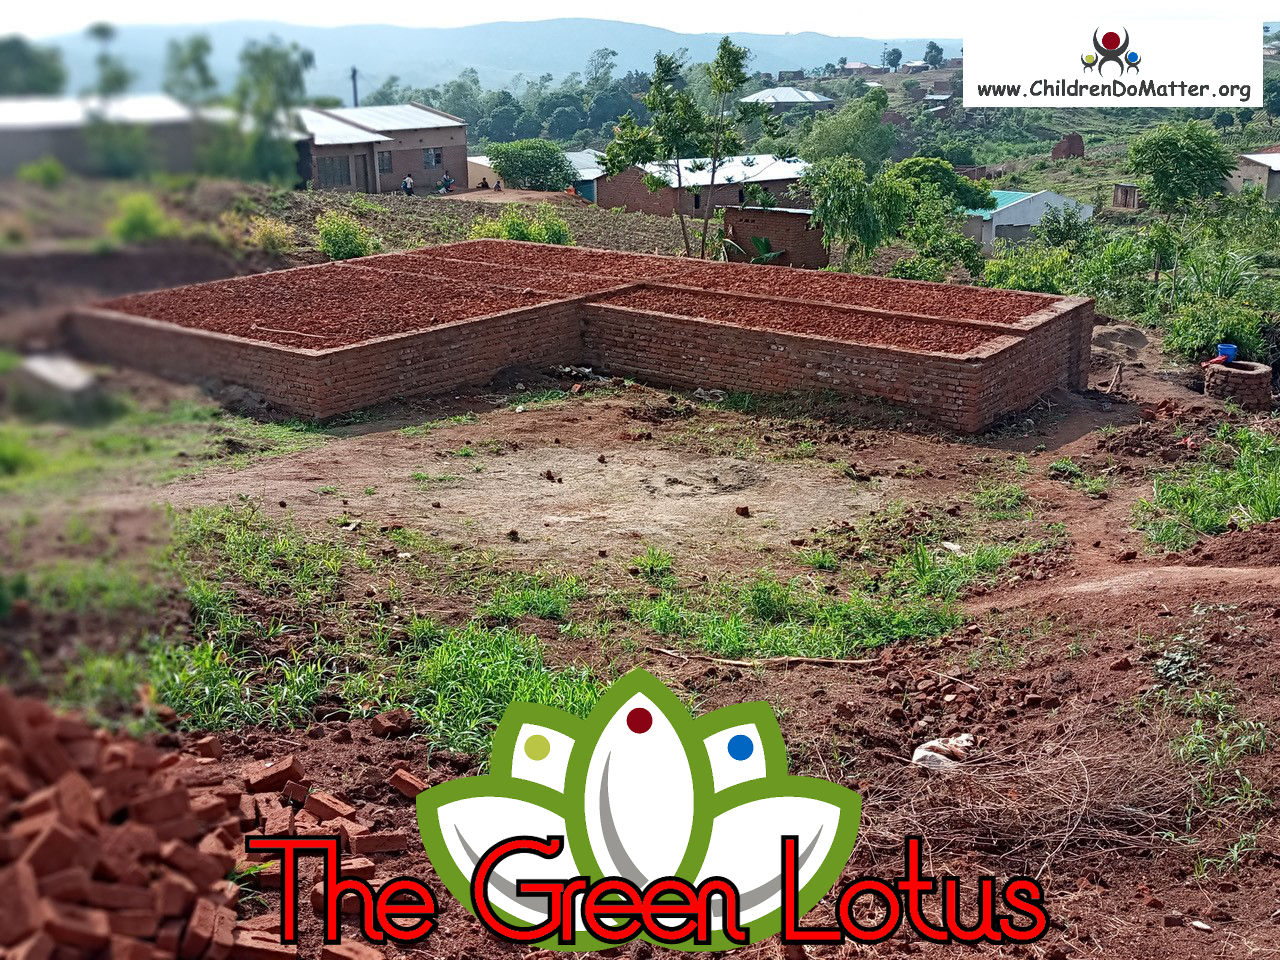 the making of the green lotus orphanage in blantyre malawi - children do matter - 7